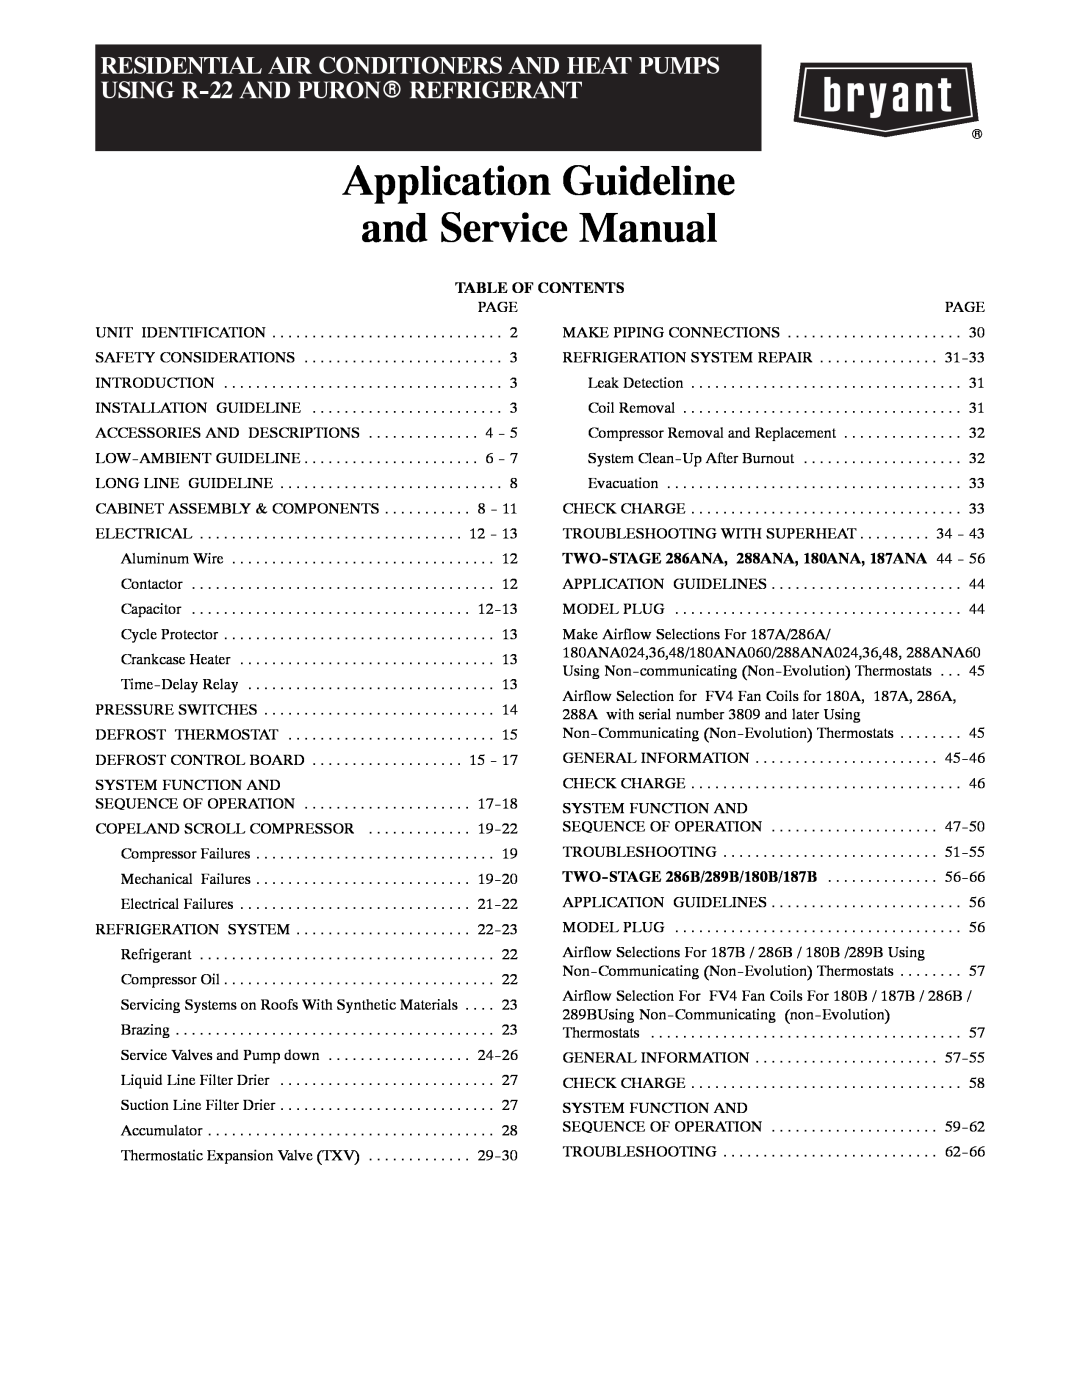 Bryant R-22 service manual Application Guideline and Service Manual, Residential Air Conditioners And Heat Pumps 